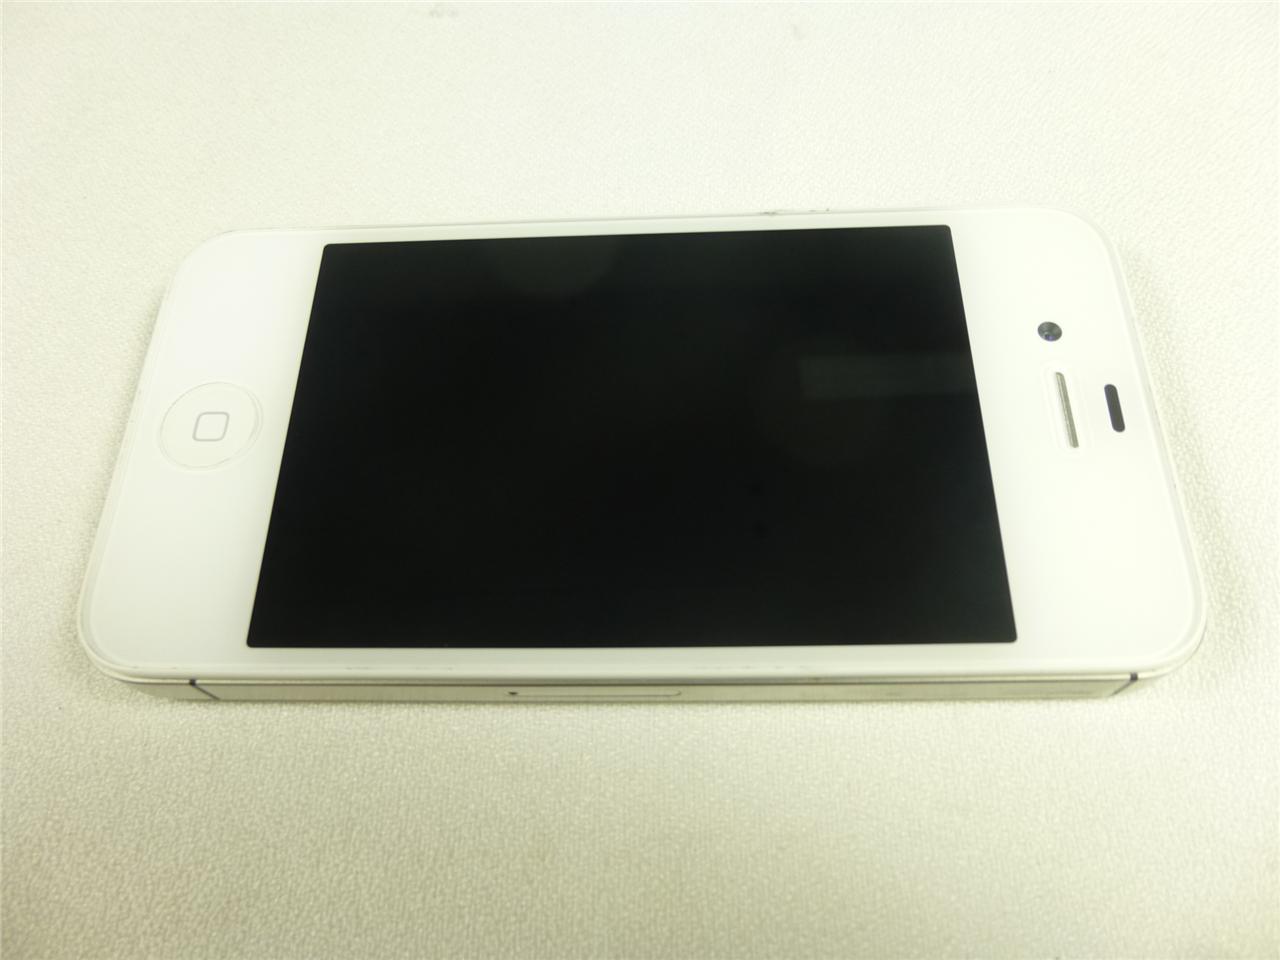 Details about **USED** Sprint Apple iPhone 4S 8GB - White - CLEAN ESN ...